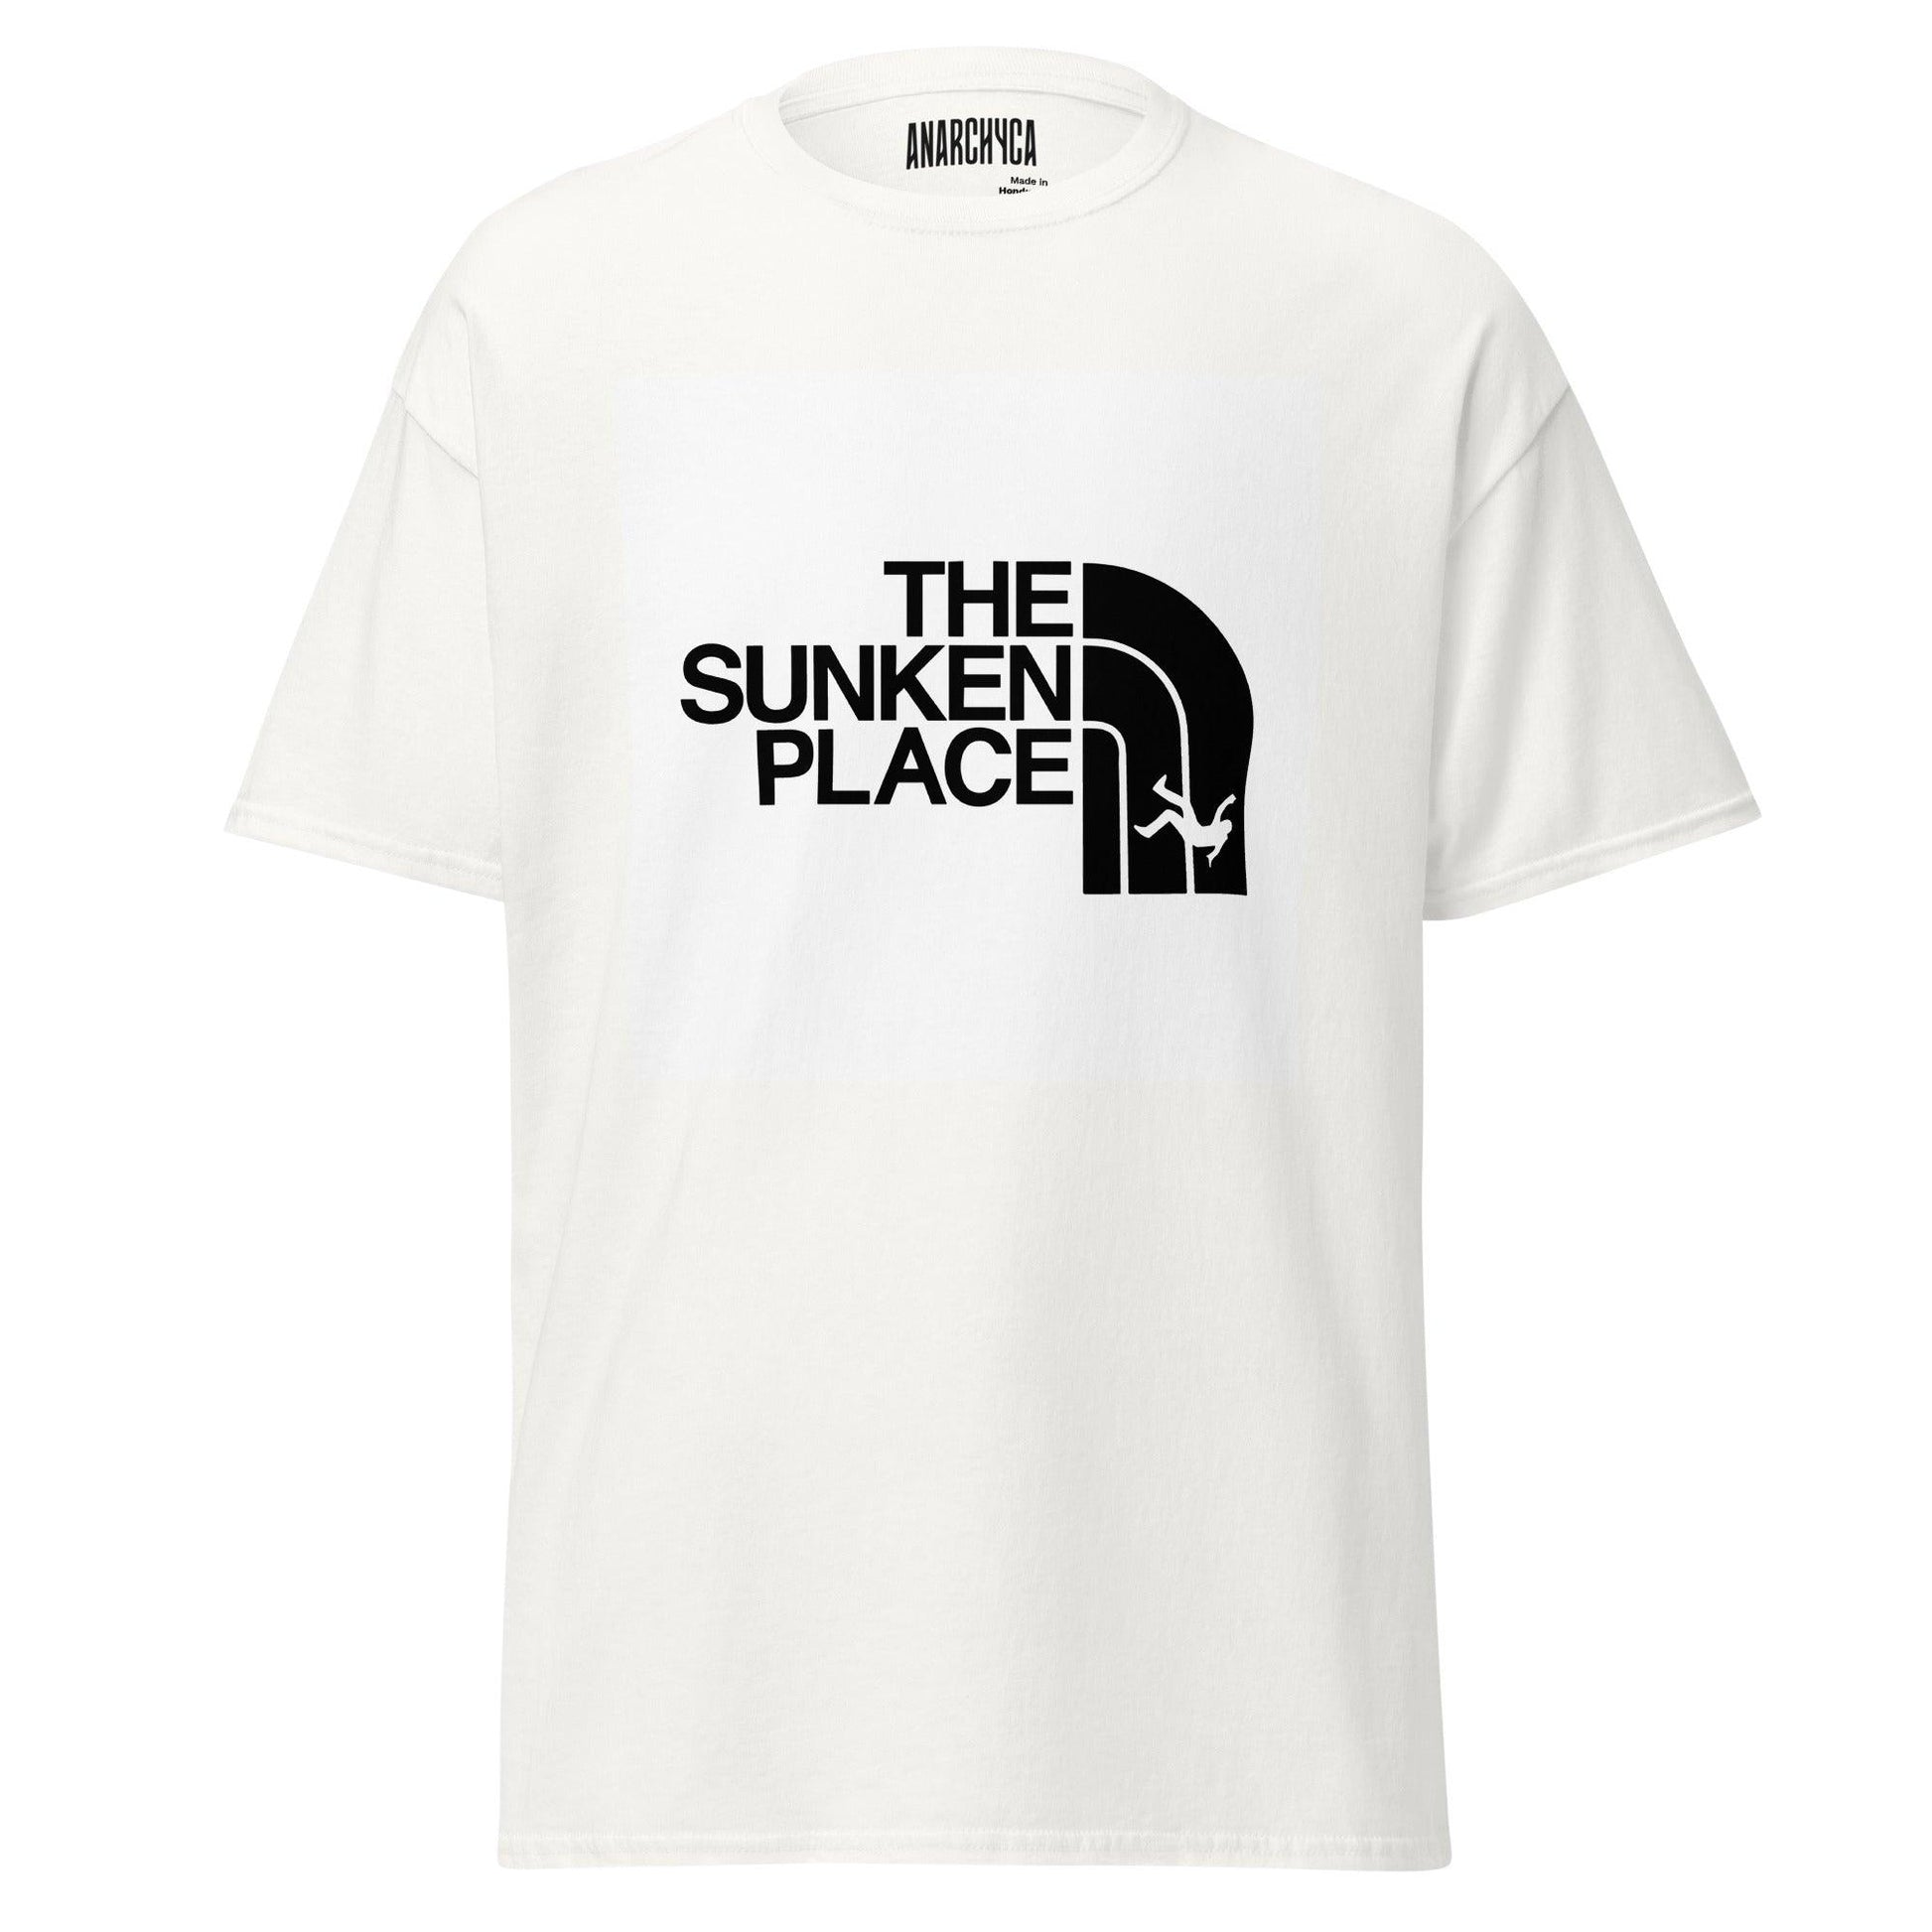 THE SUNKEN PLACE - Anarchyca-clothing